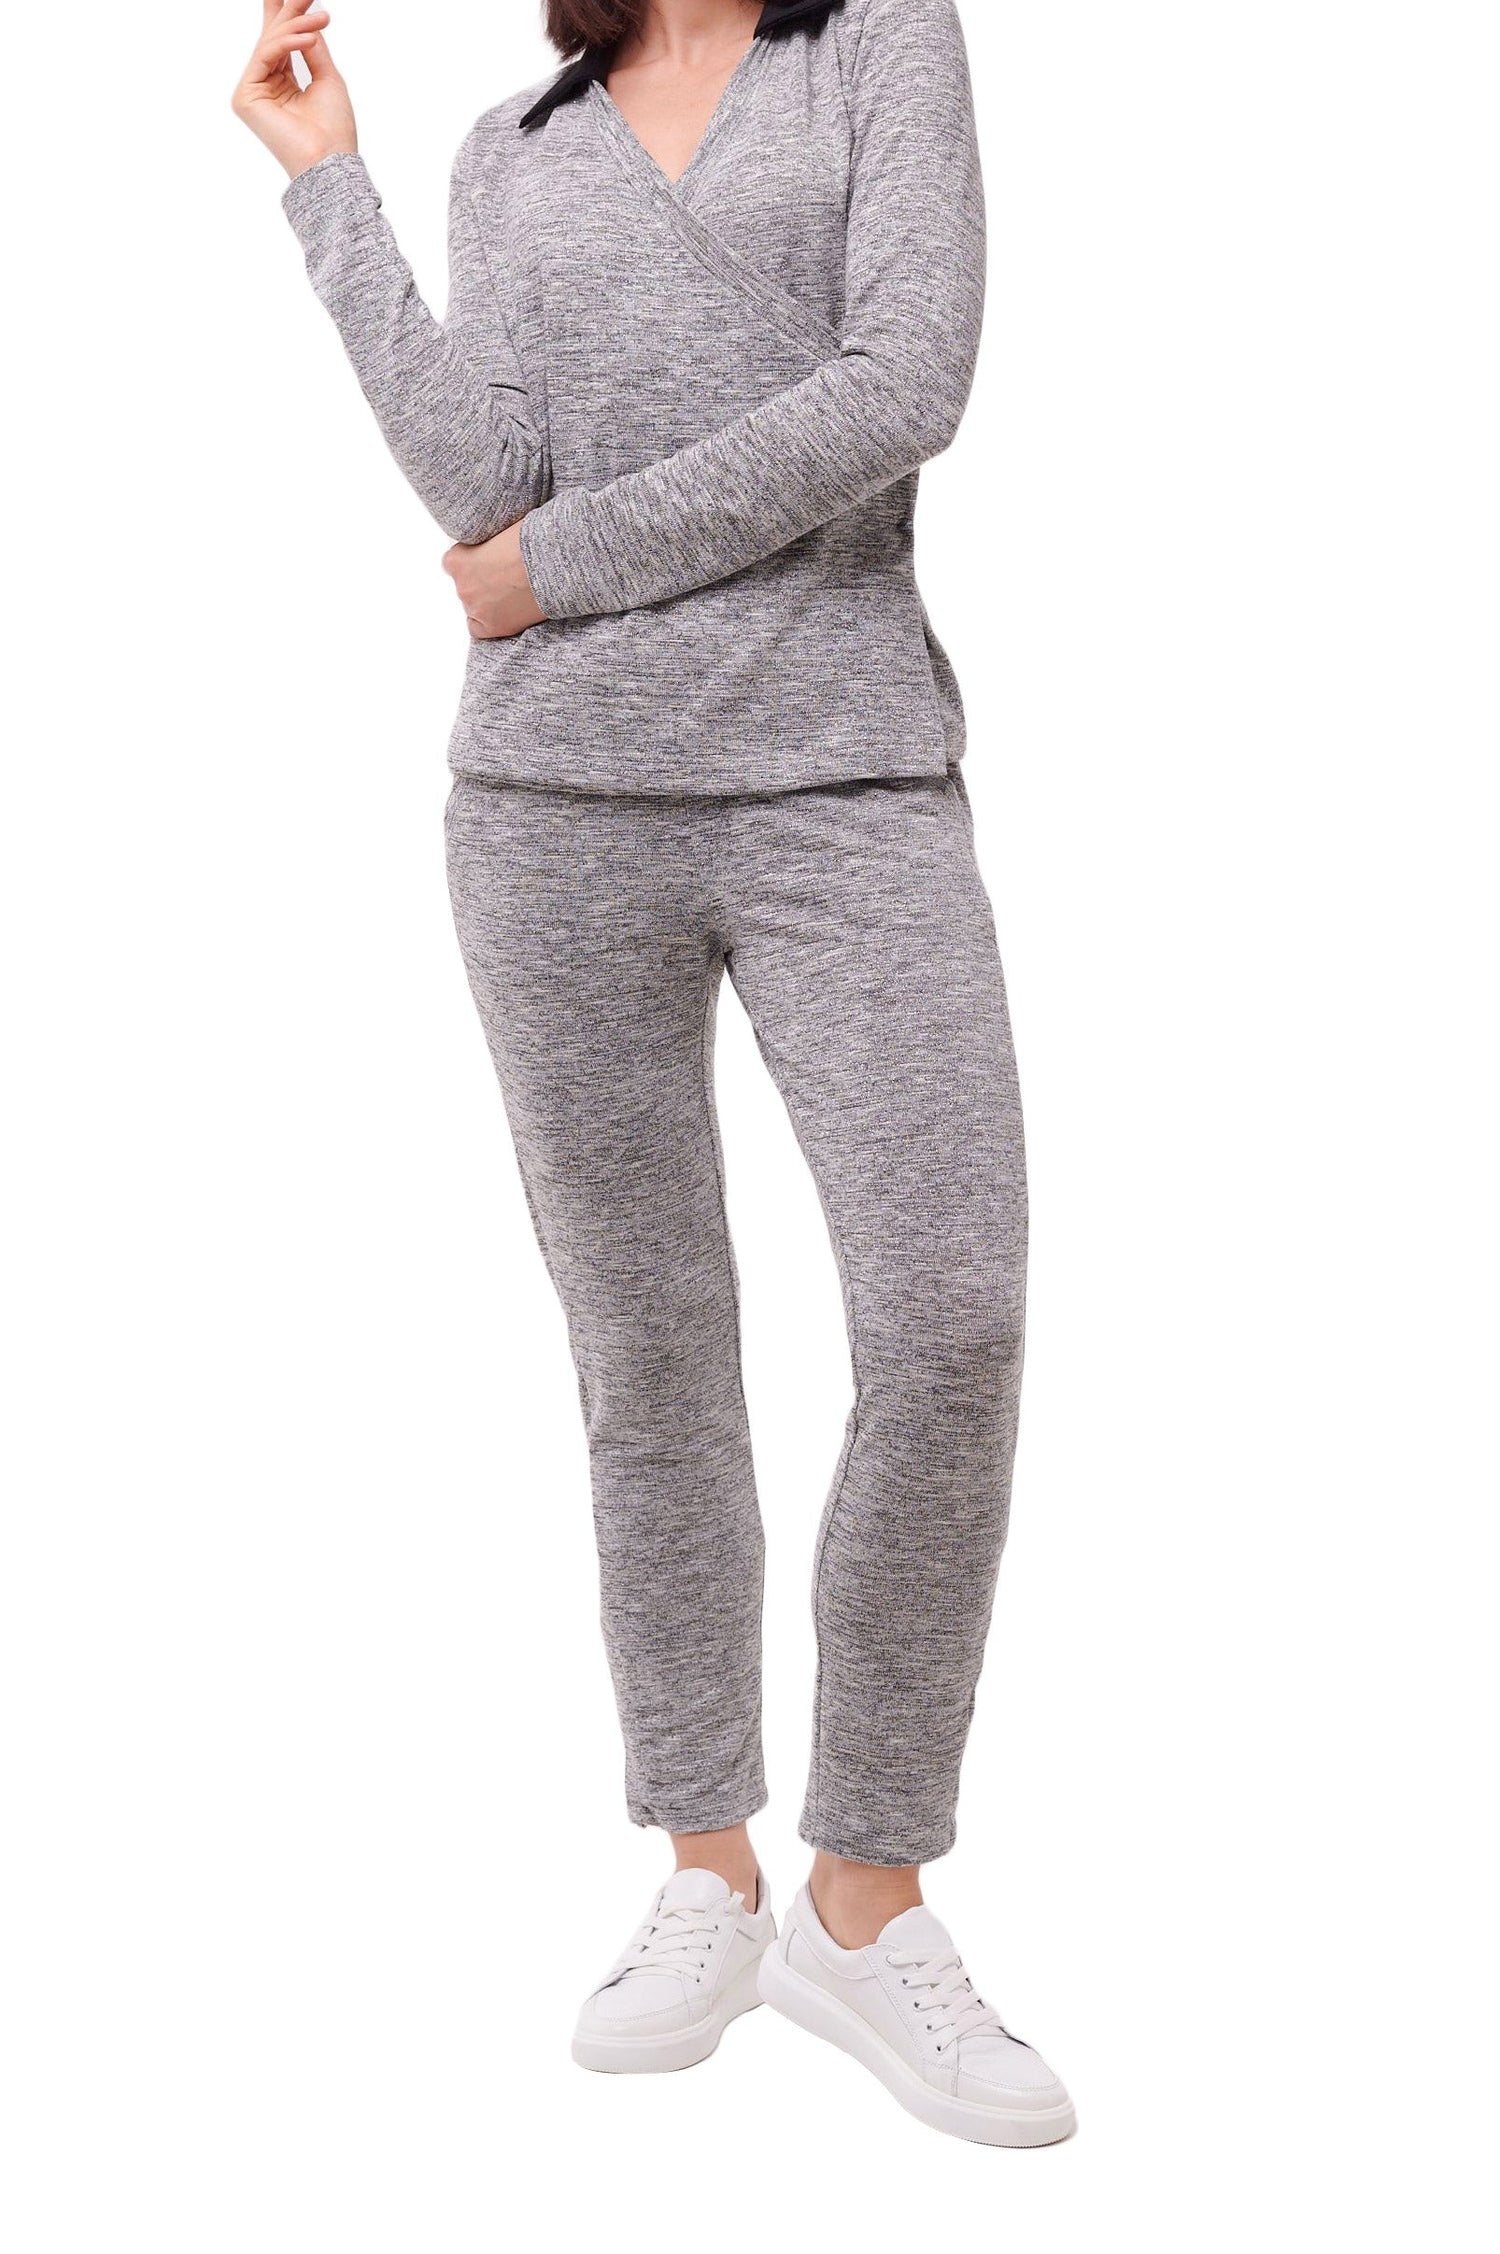 Woman wearing grey full length slim comfort pants with ankle snap closures and matching top.